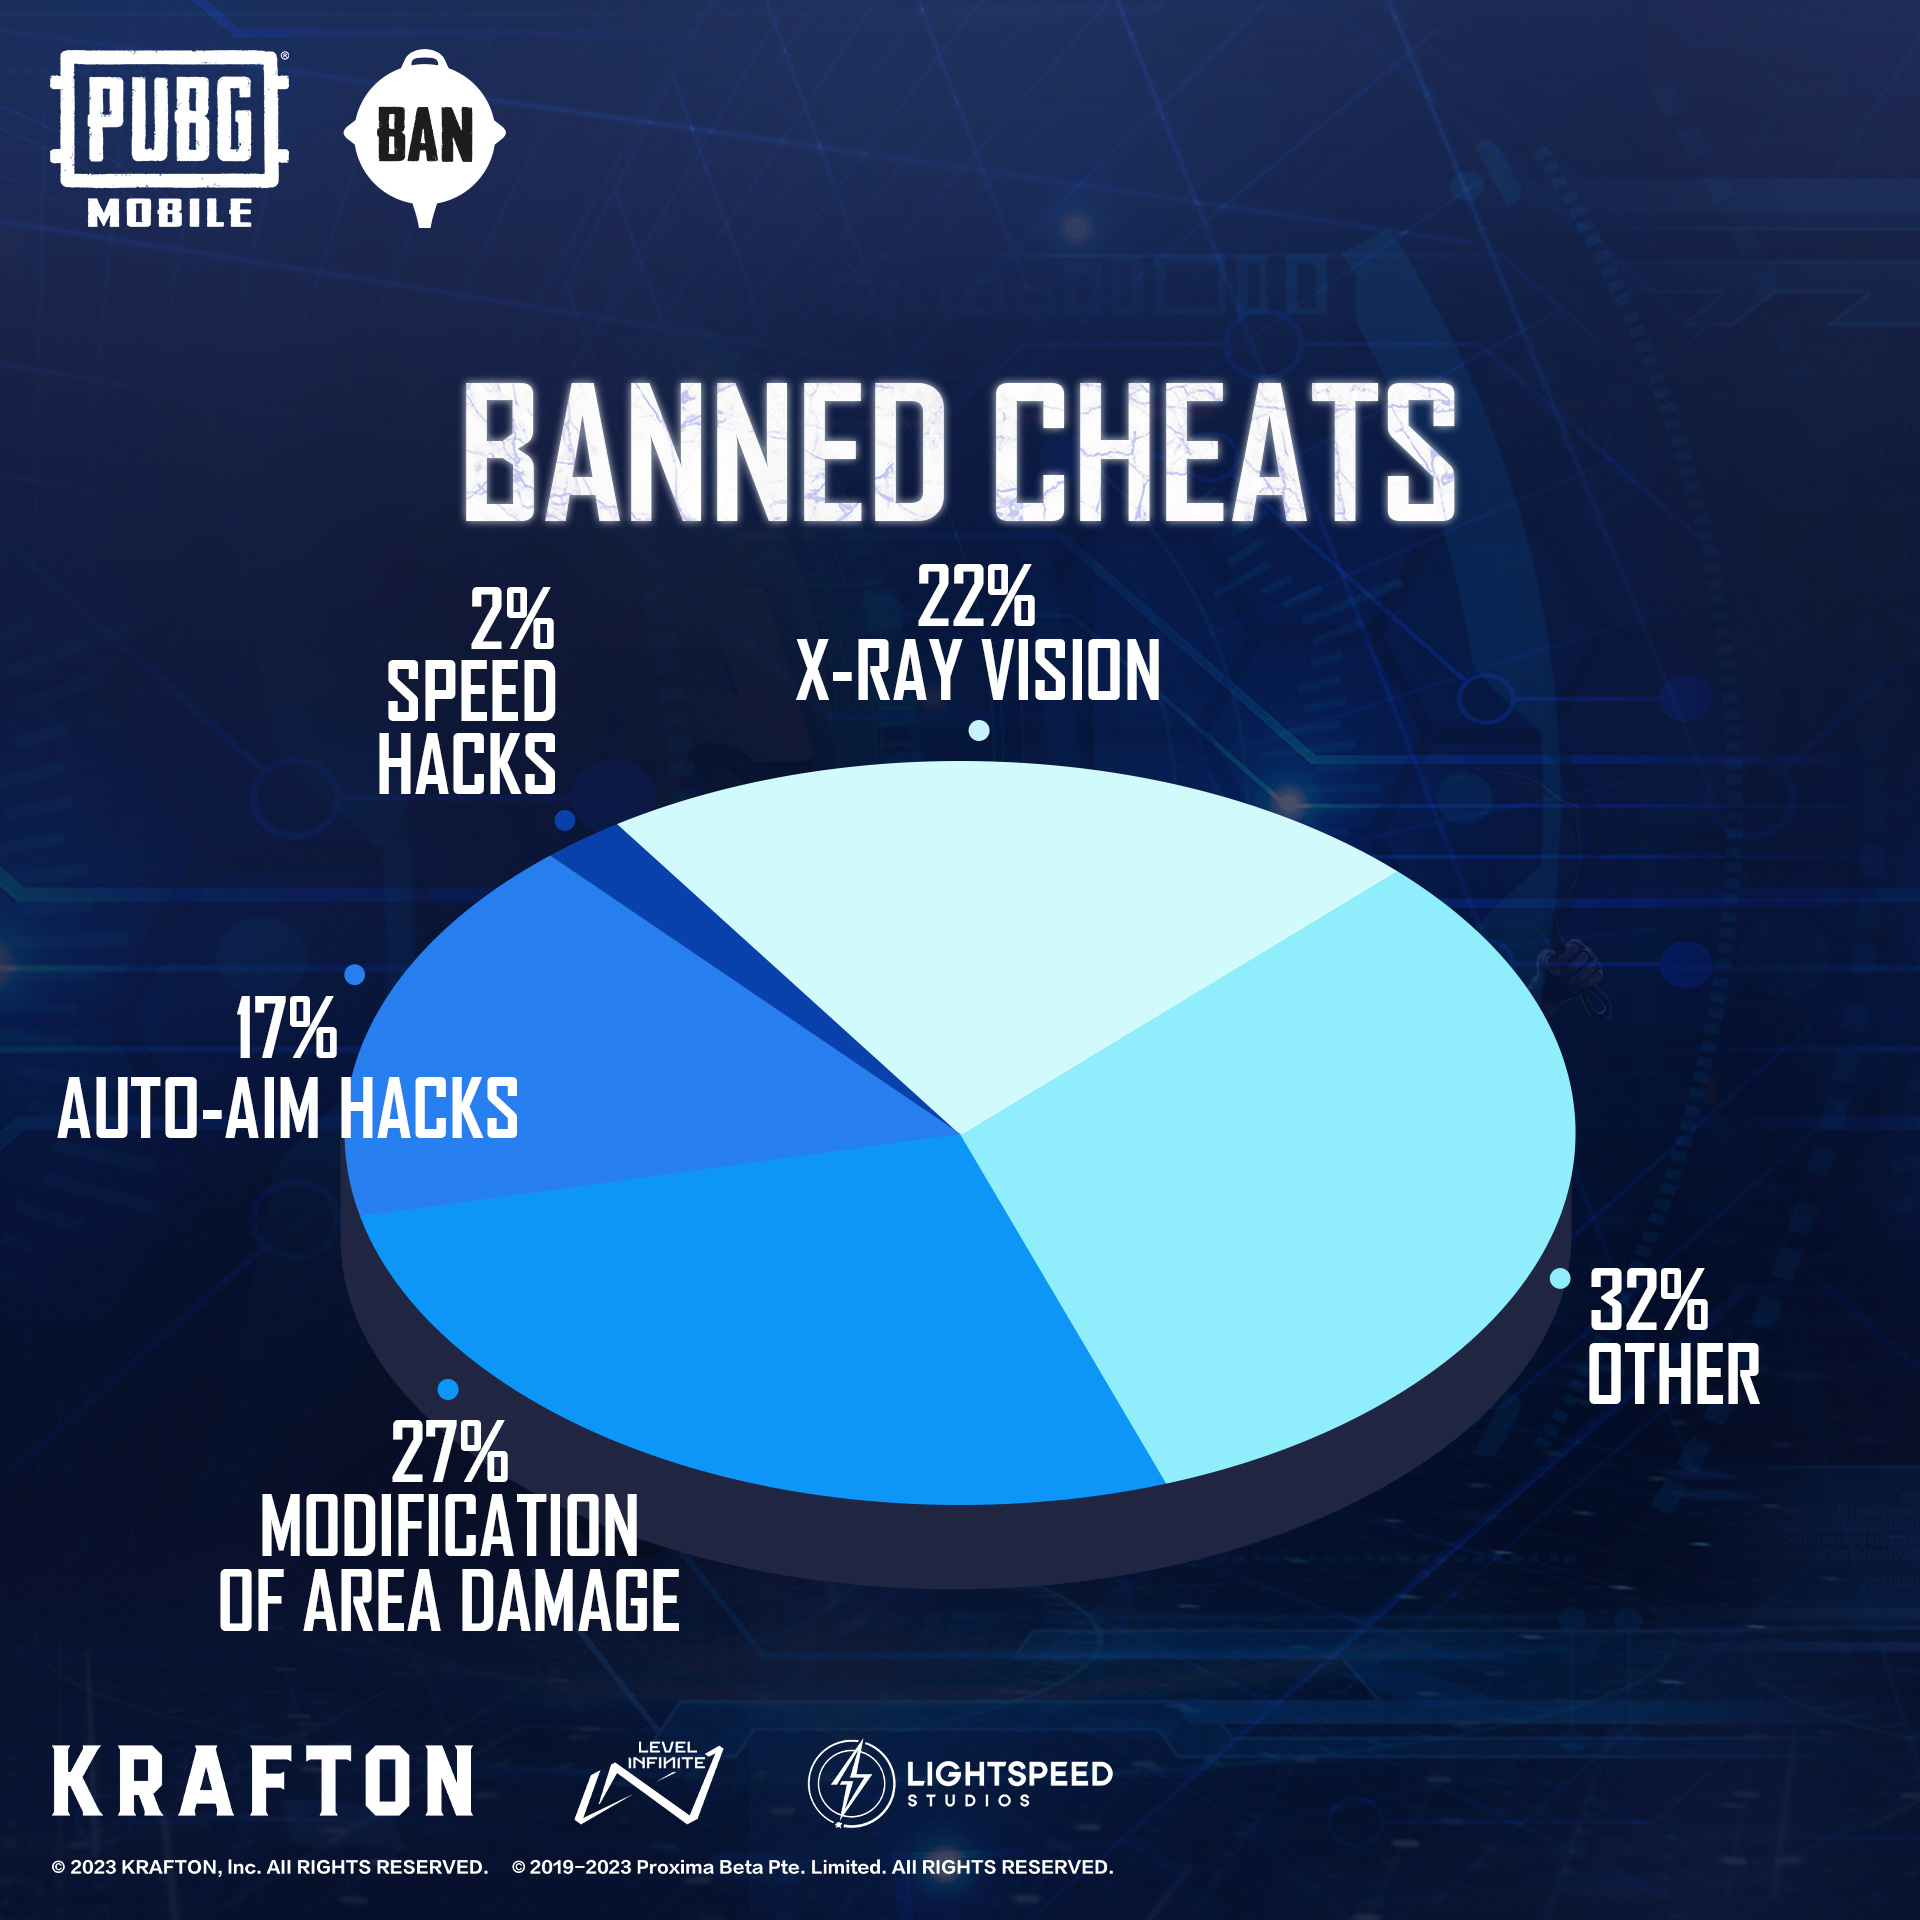 PUBG Mobile Ban Pan Report Week 17: Level Infinite permanently suspends 289,132 PUBG Mobile accounts for using cheats, CHECK FULL REPORT